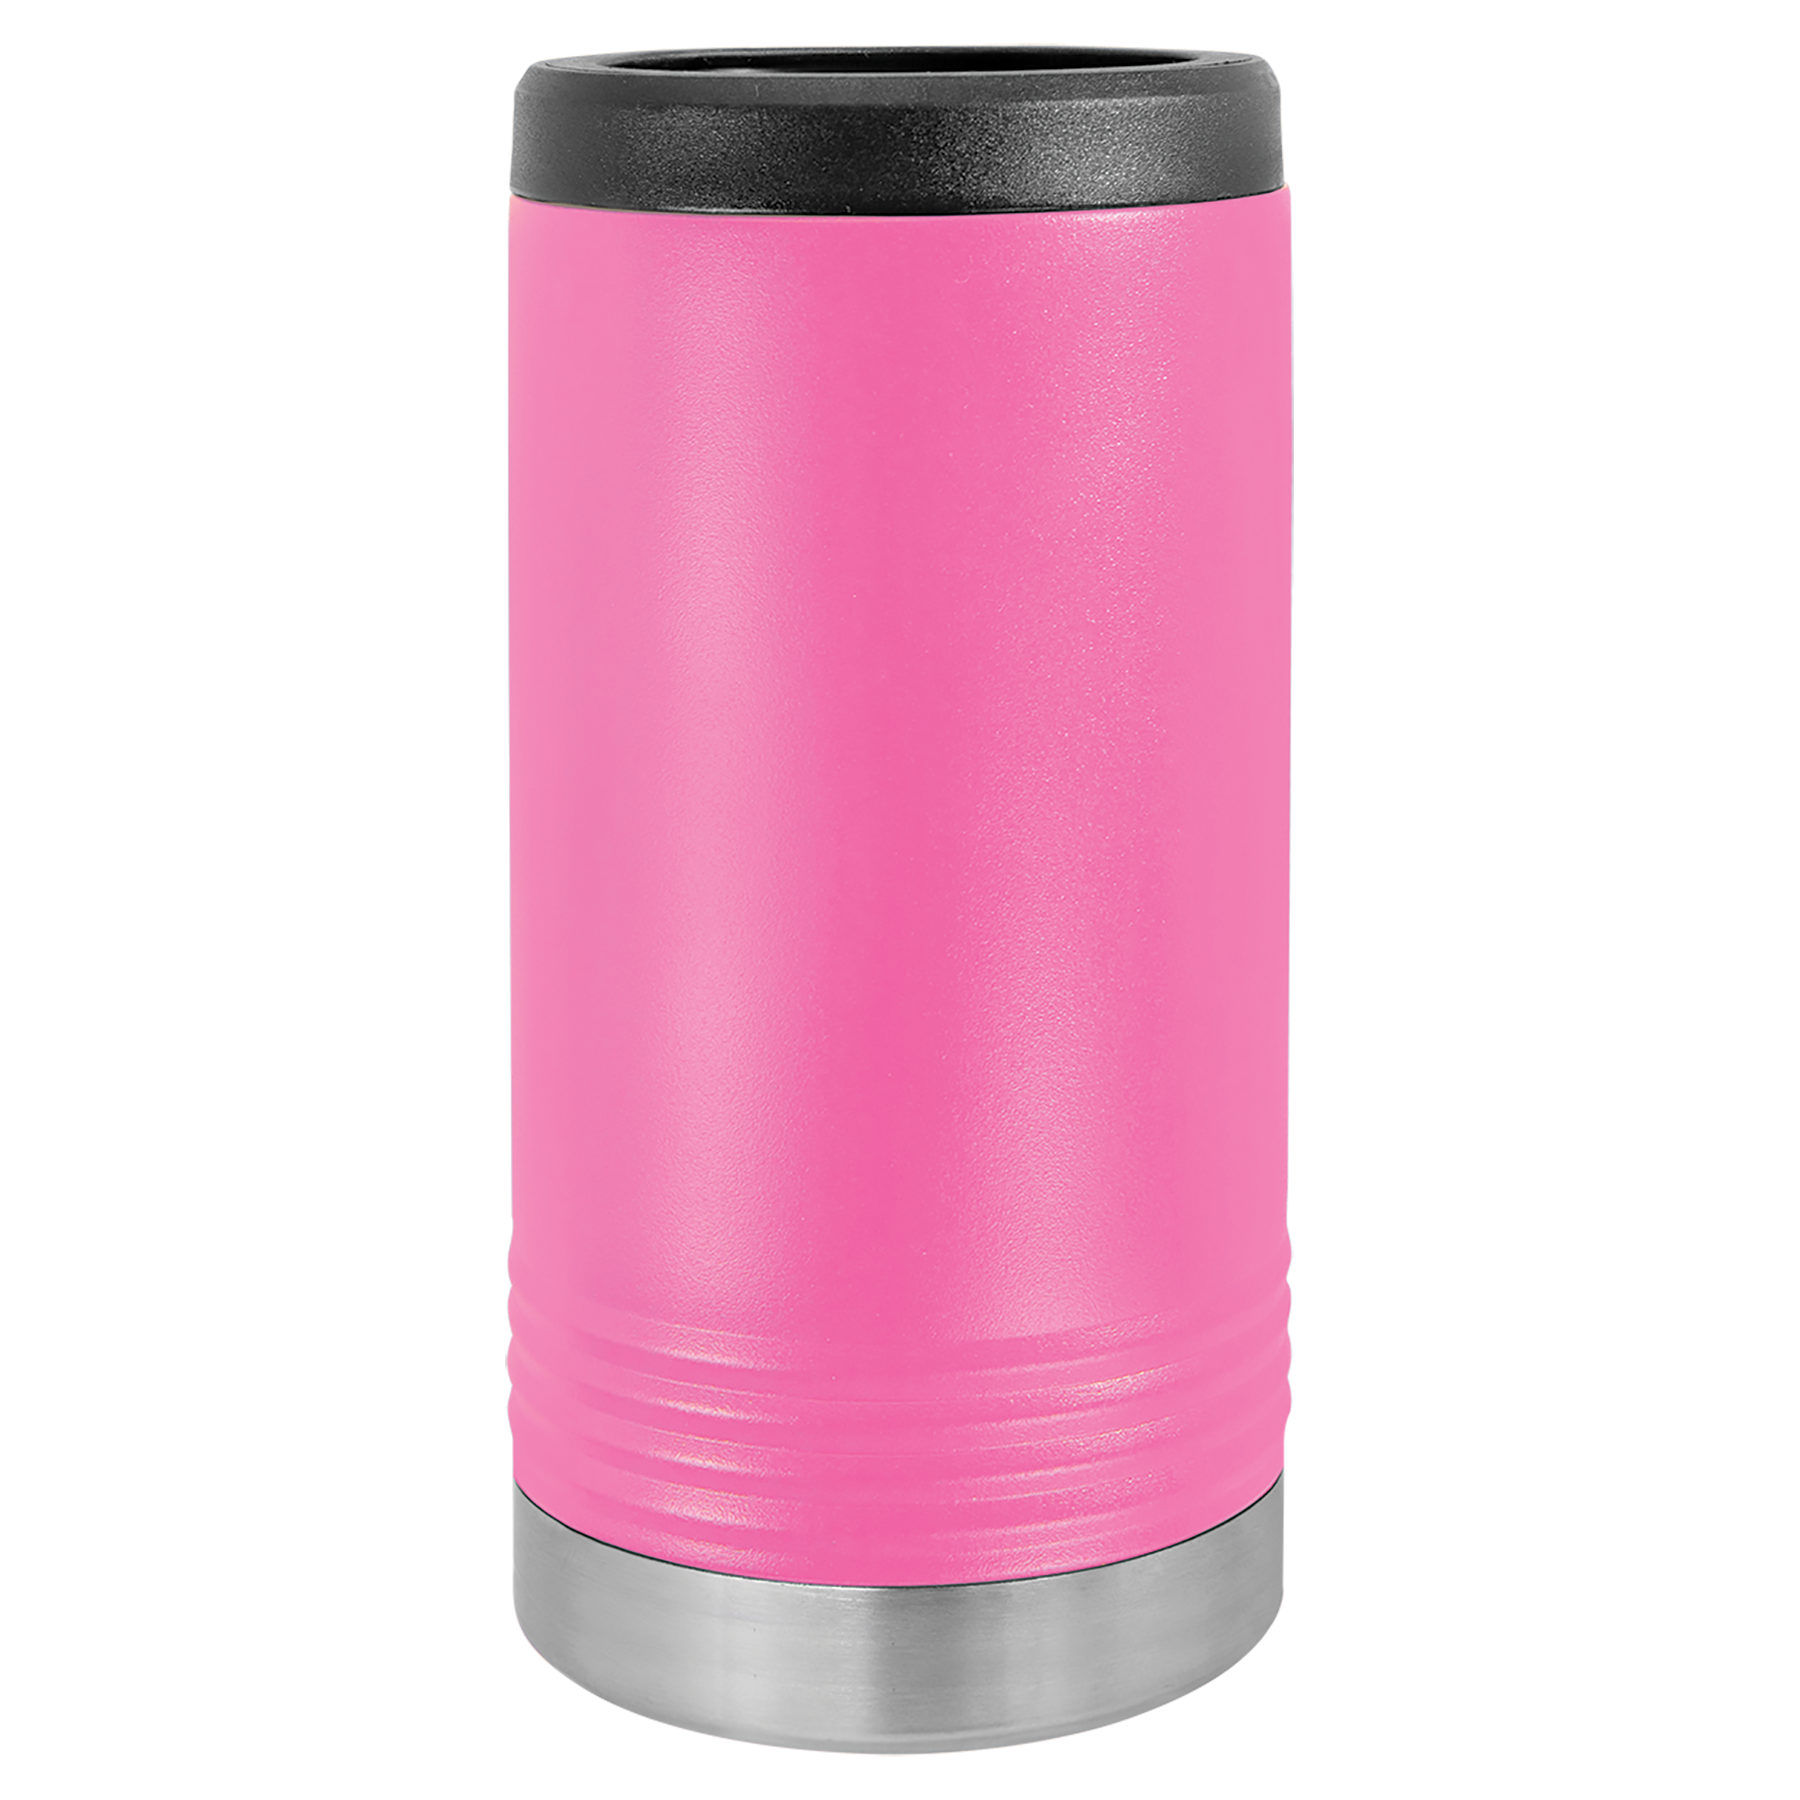 Pink Slim Beverage Holder -One Free Engraving   -Double-wall Vacuum Insulated  -Made from 18/8 Gauge Stainless Steel (Type 304 Food Grade)  -Fits most Tall Slim Cans  -Not recommended for Dishwasher  -Works with Cold and Hot Drinks  -17 Color Options  -Perfect for Personalized Gifts, Awards, Incentives, Swag & Fundraisers